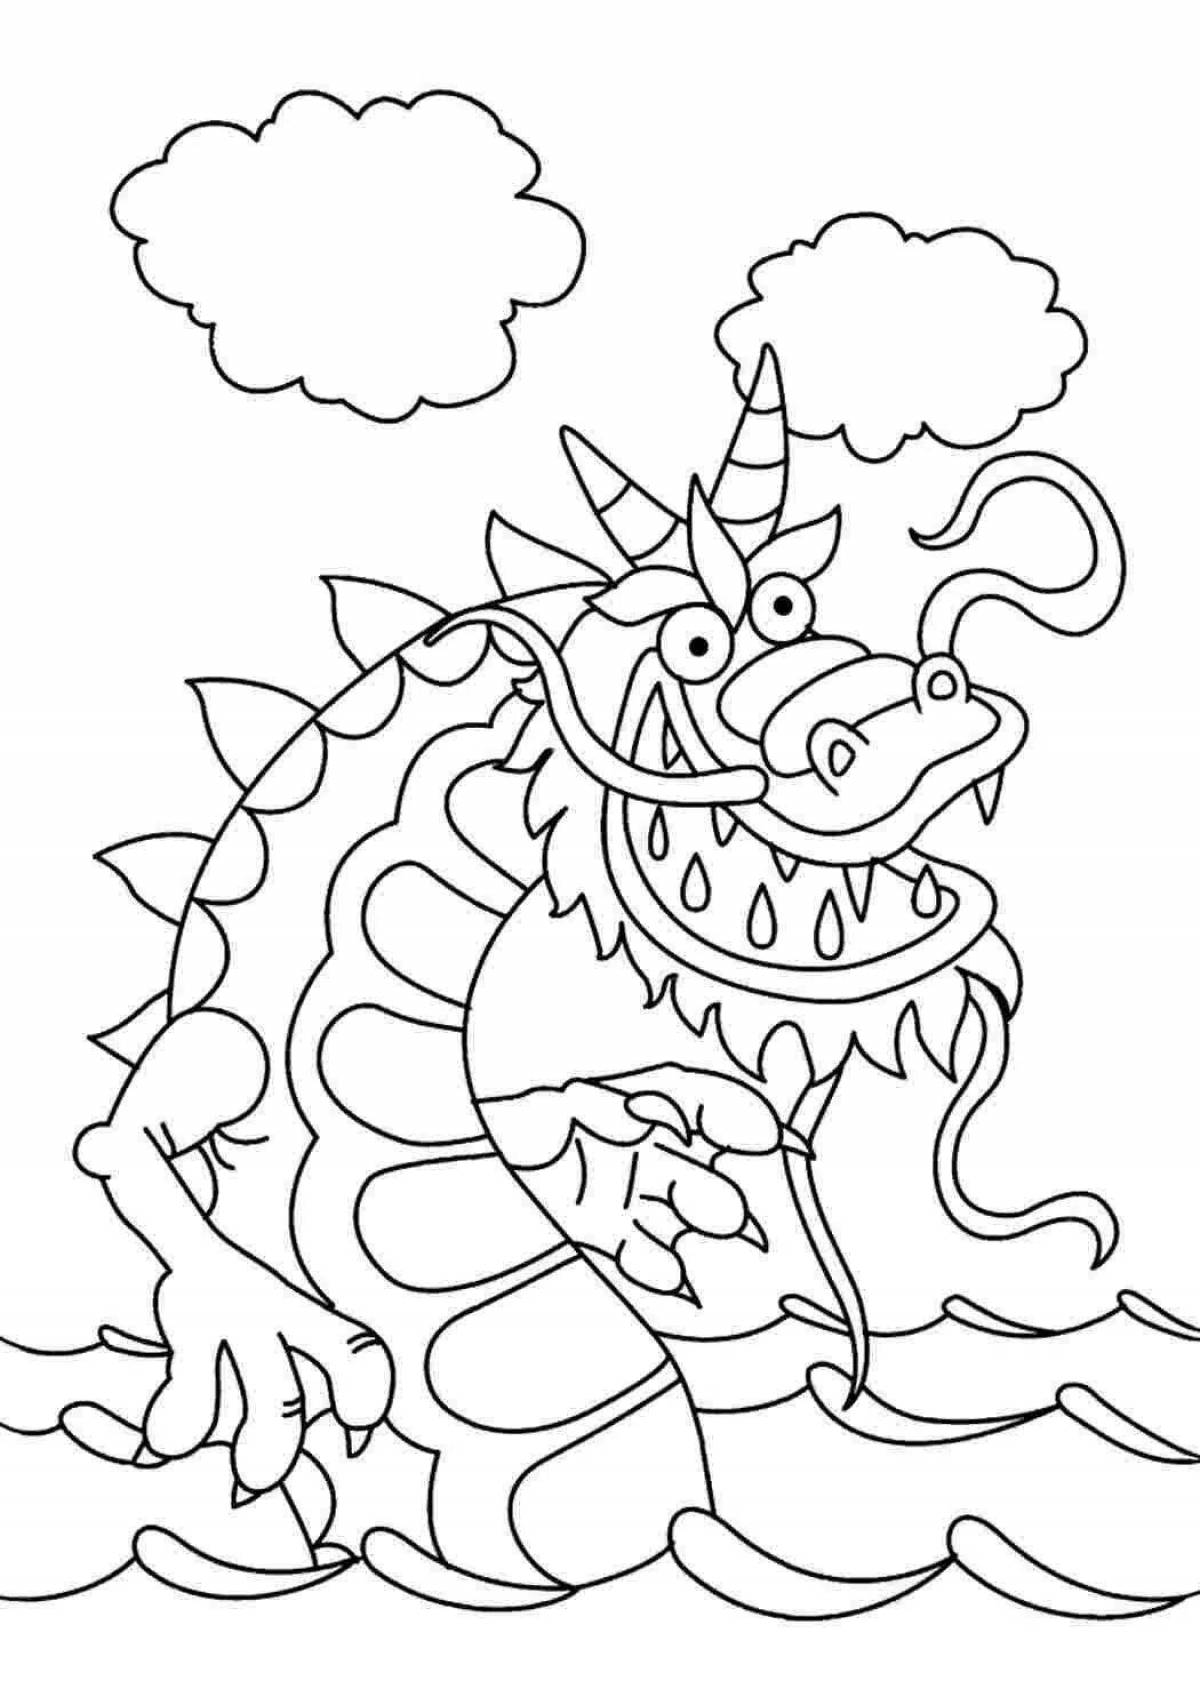 Royal year of the dragon coloring book